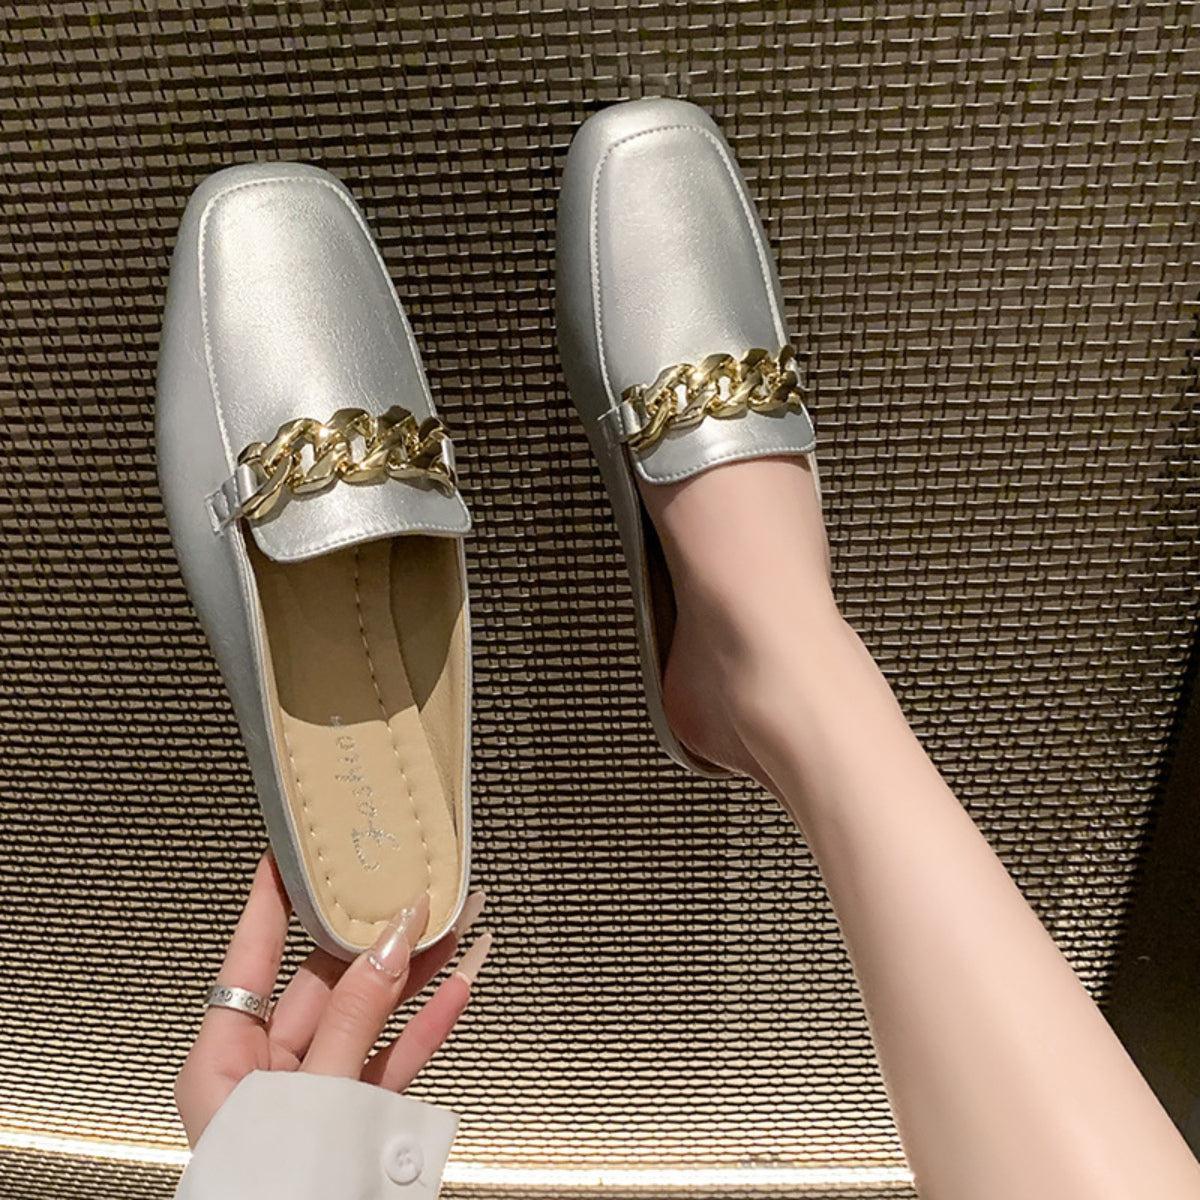 a woman's hand holding onto a pair of silver shoes